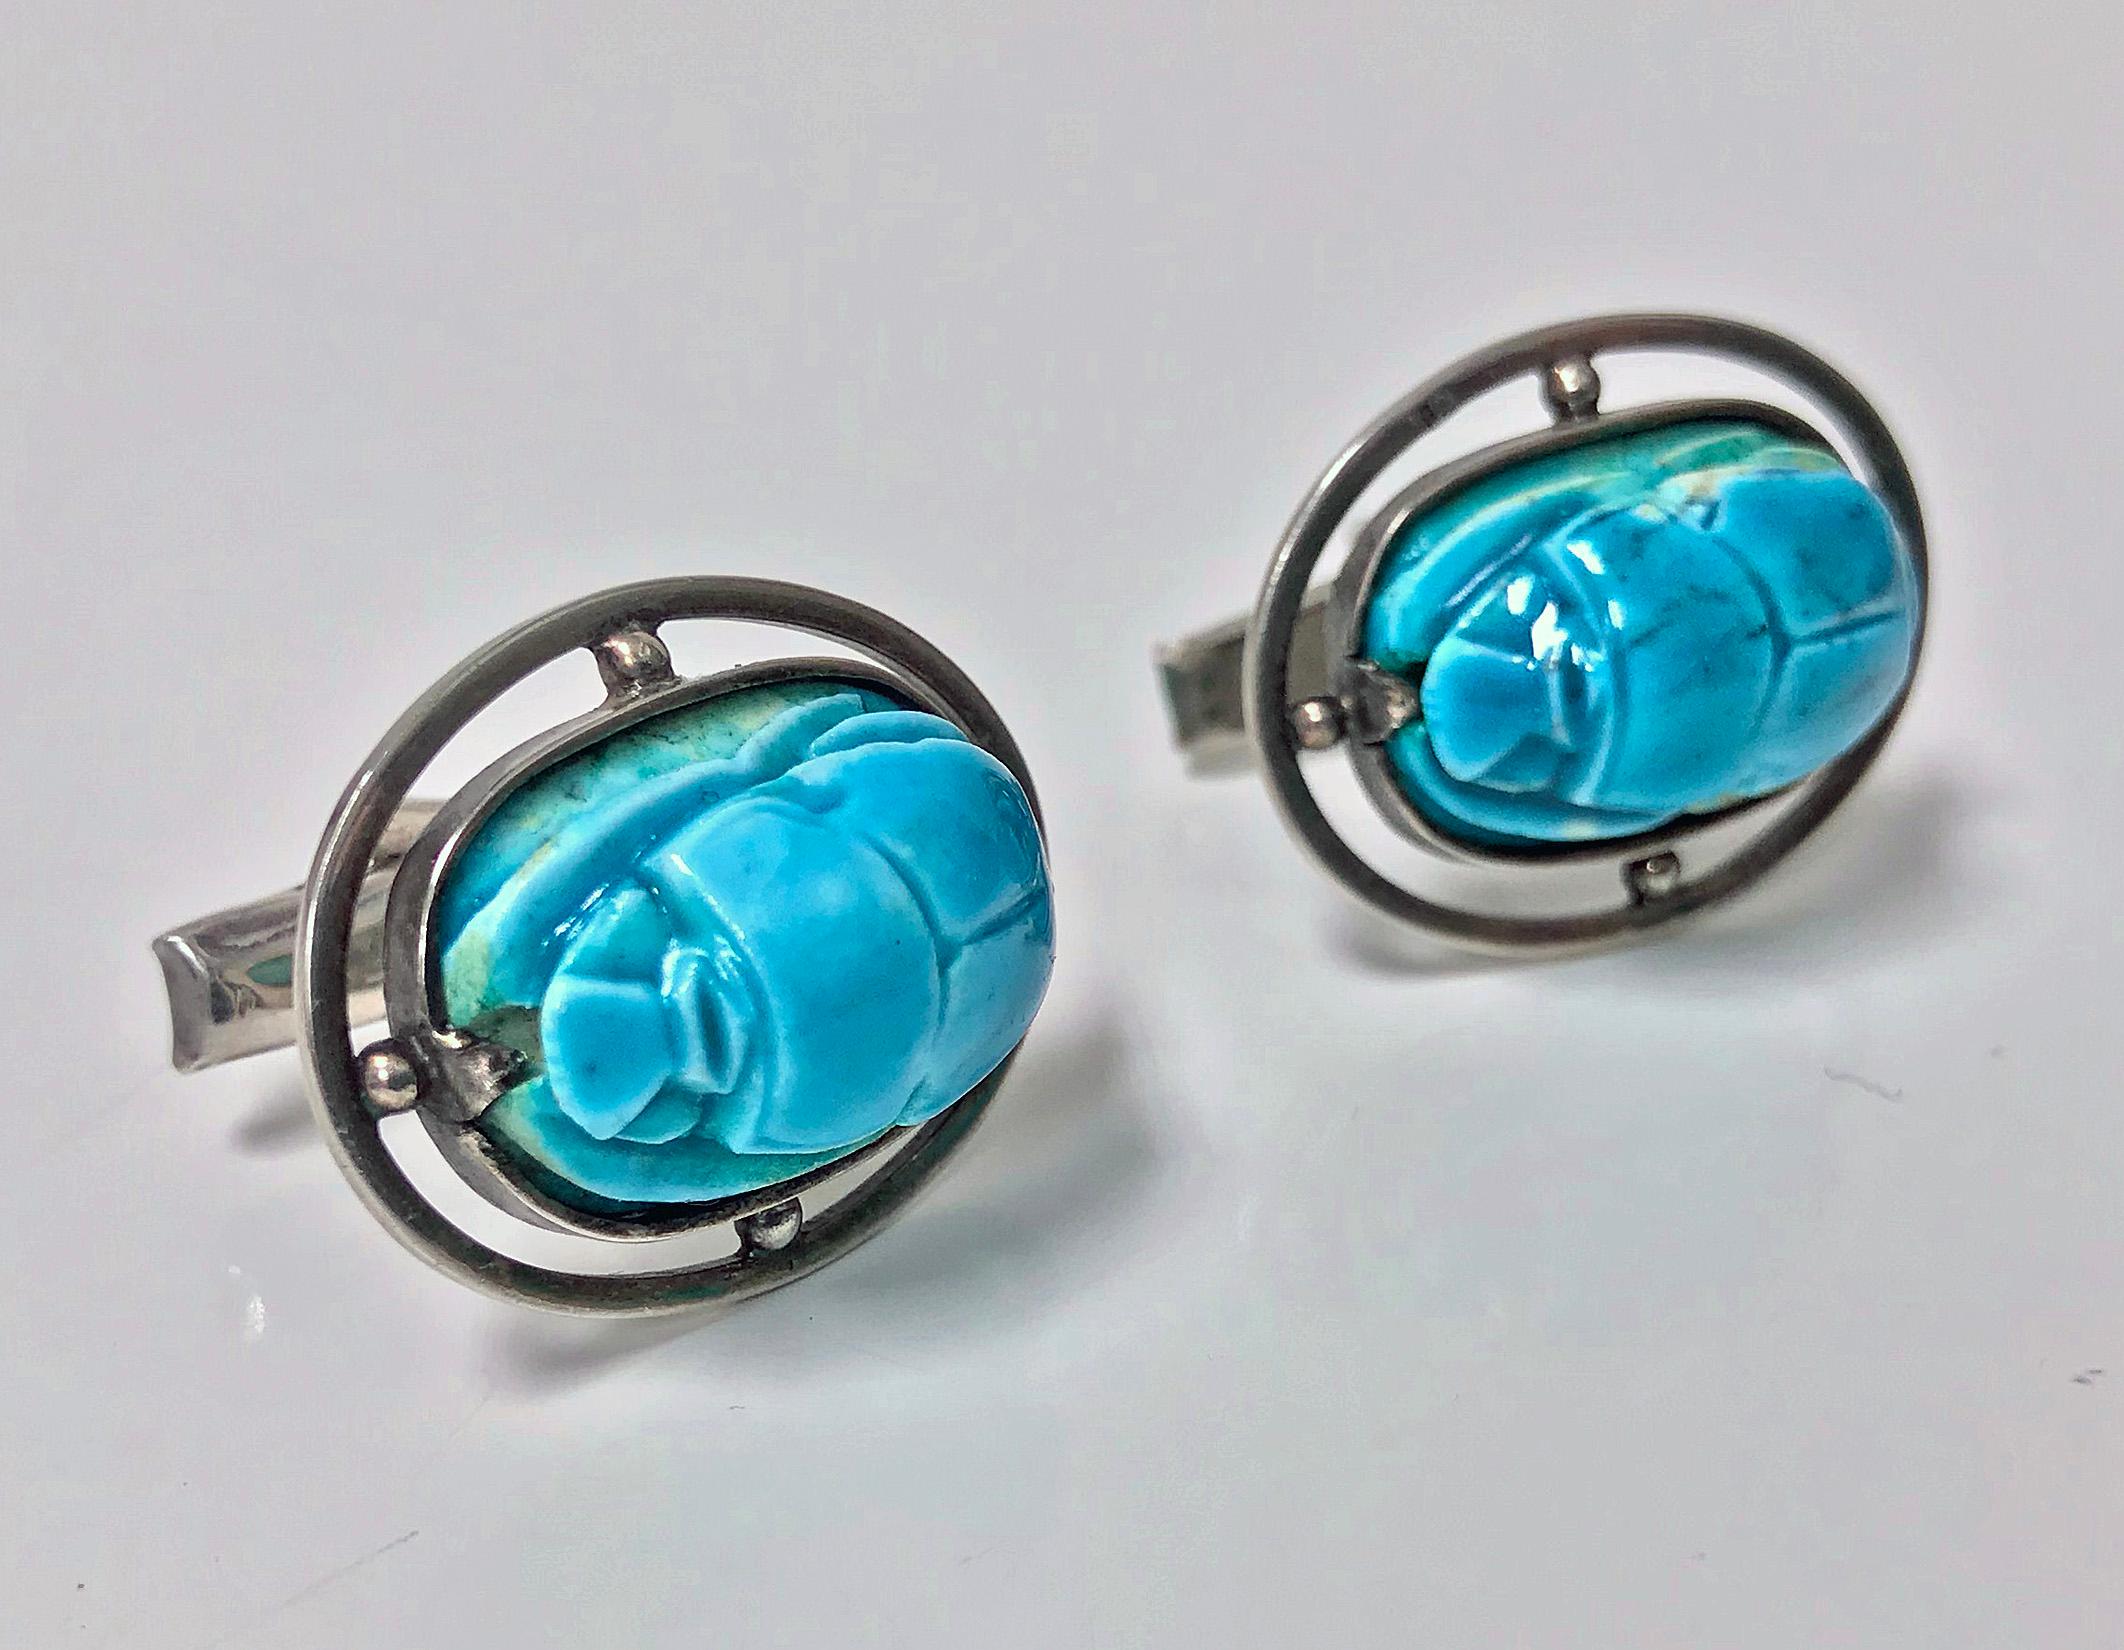 Pair of vintage Egyptian revival Silver turquoise scarab beetle cufflinks, C.1960. Split  silver bezel set and bead edge mounts with a turquoise faience scarab. Silver mounts and fitments stamped with Egyptian silver hallmarks. Hinged T bar